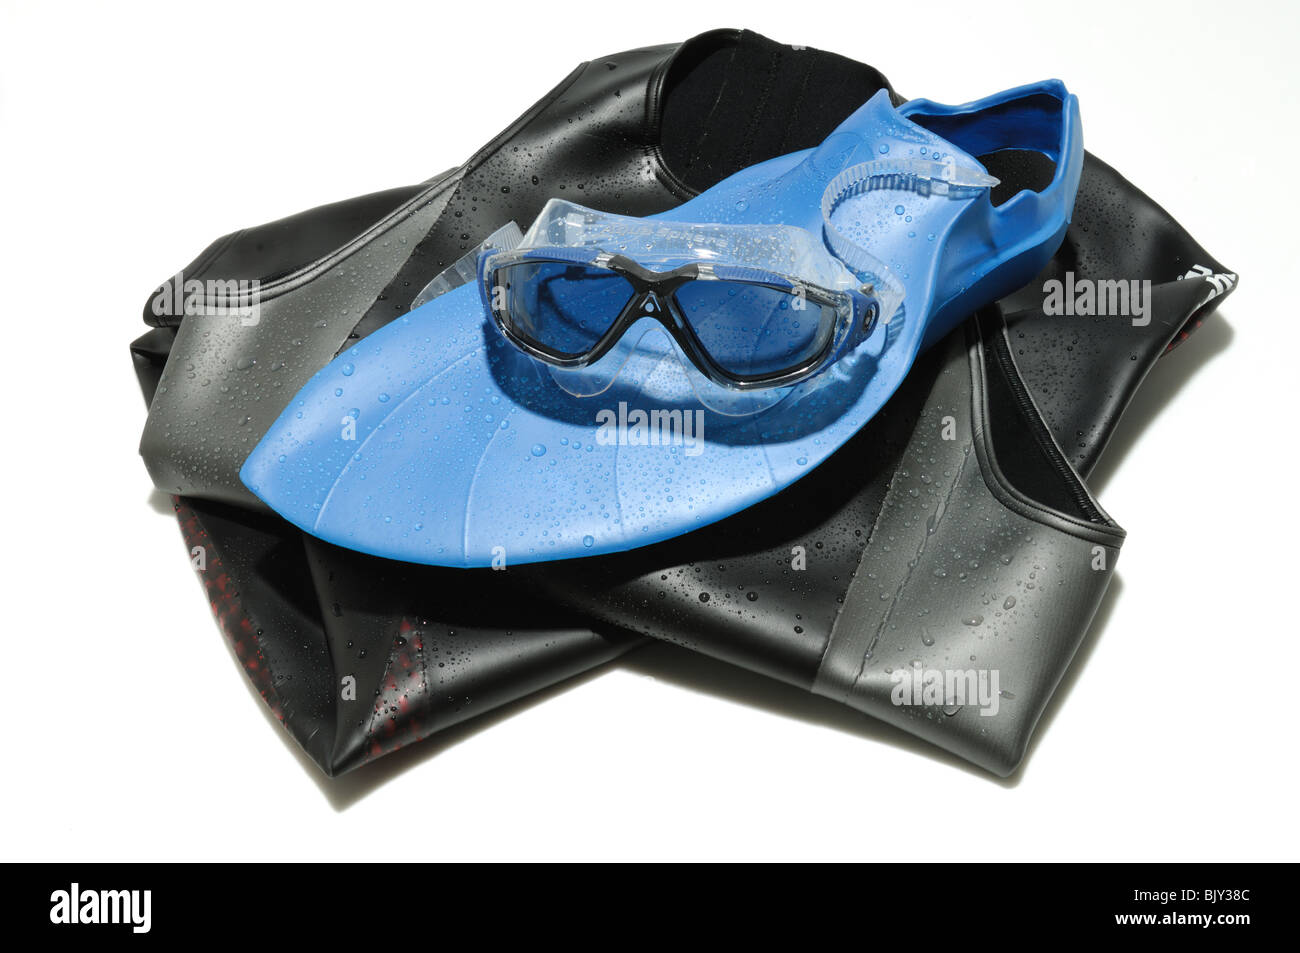 A swimming wet suit, flippers and goggles Stock Photo